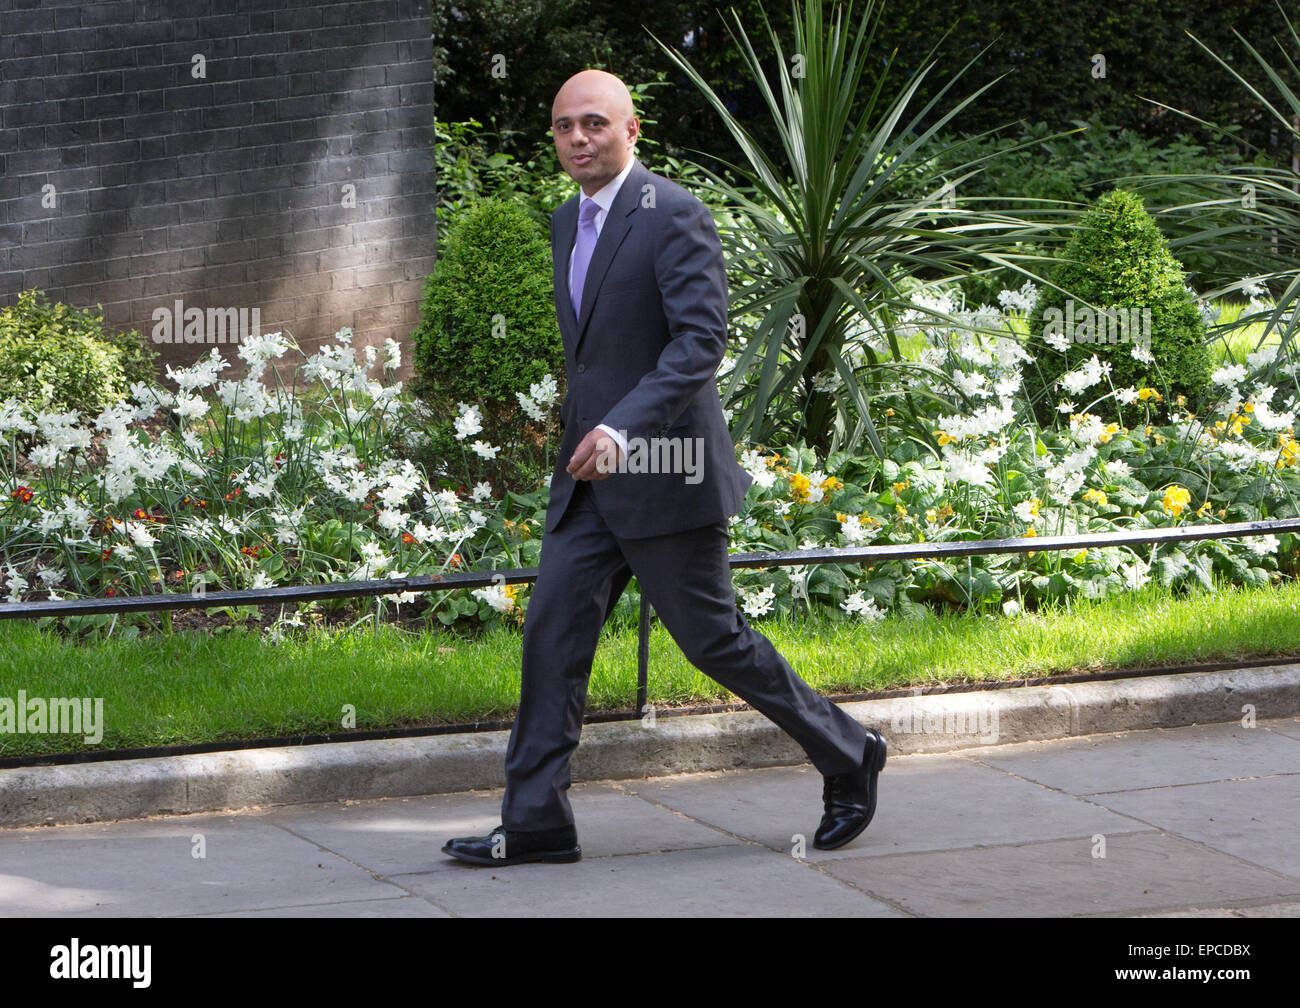 Sajid Javid,secretary of state for business Innovation and skills,arrives at Downing street for the weekly cabinet meeting Stock Photo